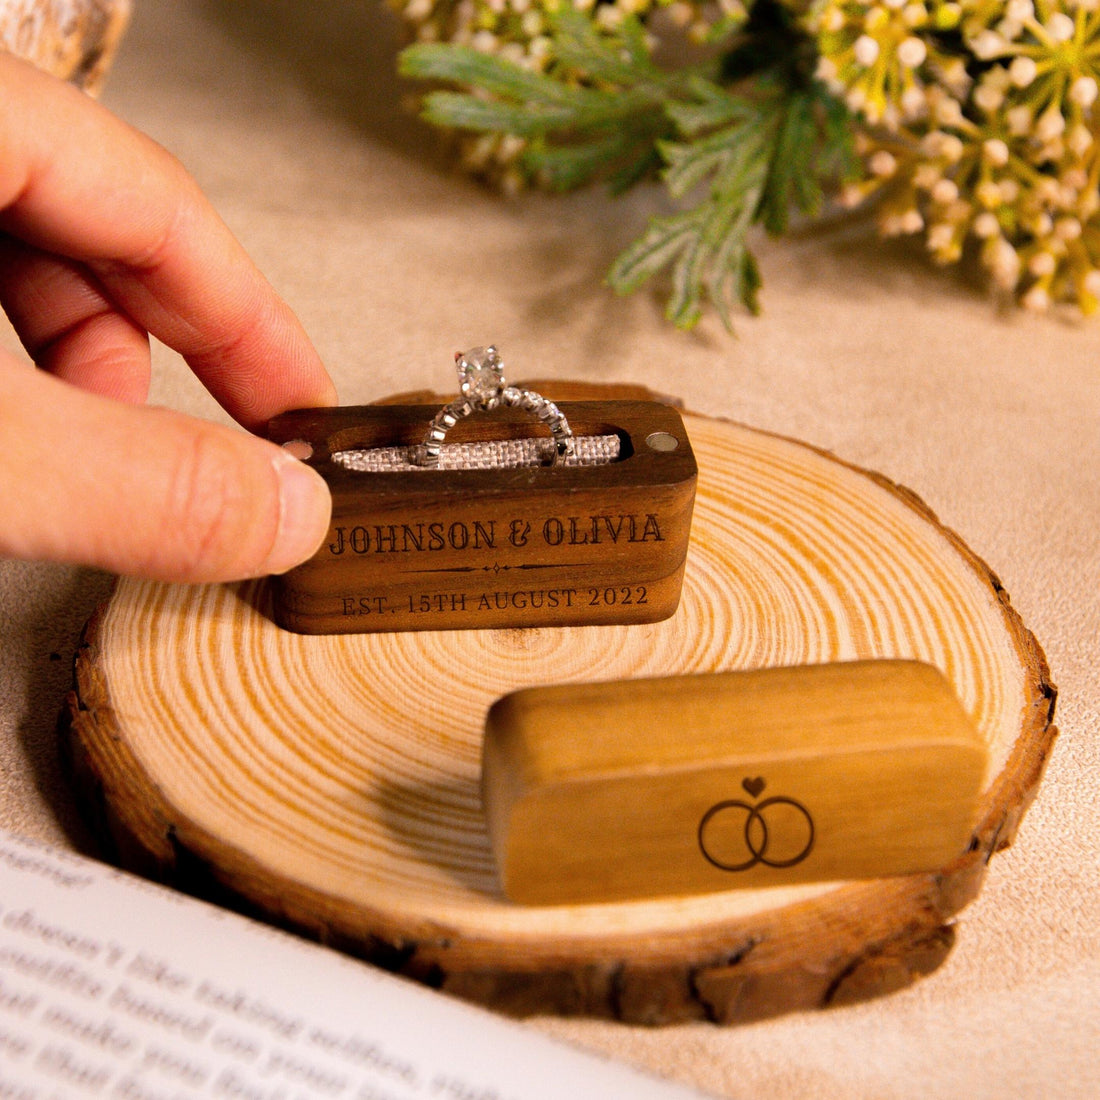 17 Stunning Wedding Ring Boxes That Will Steal the Show - Groovy Groomsmen  Gifts